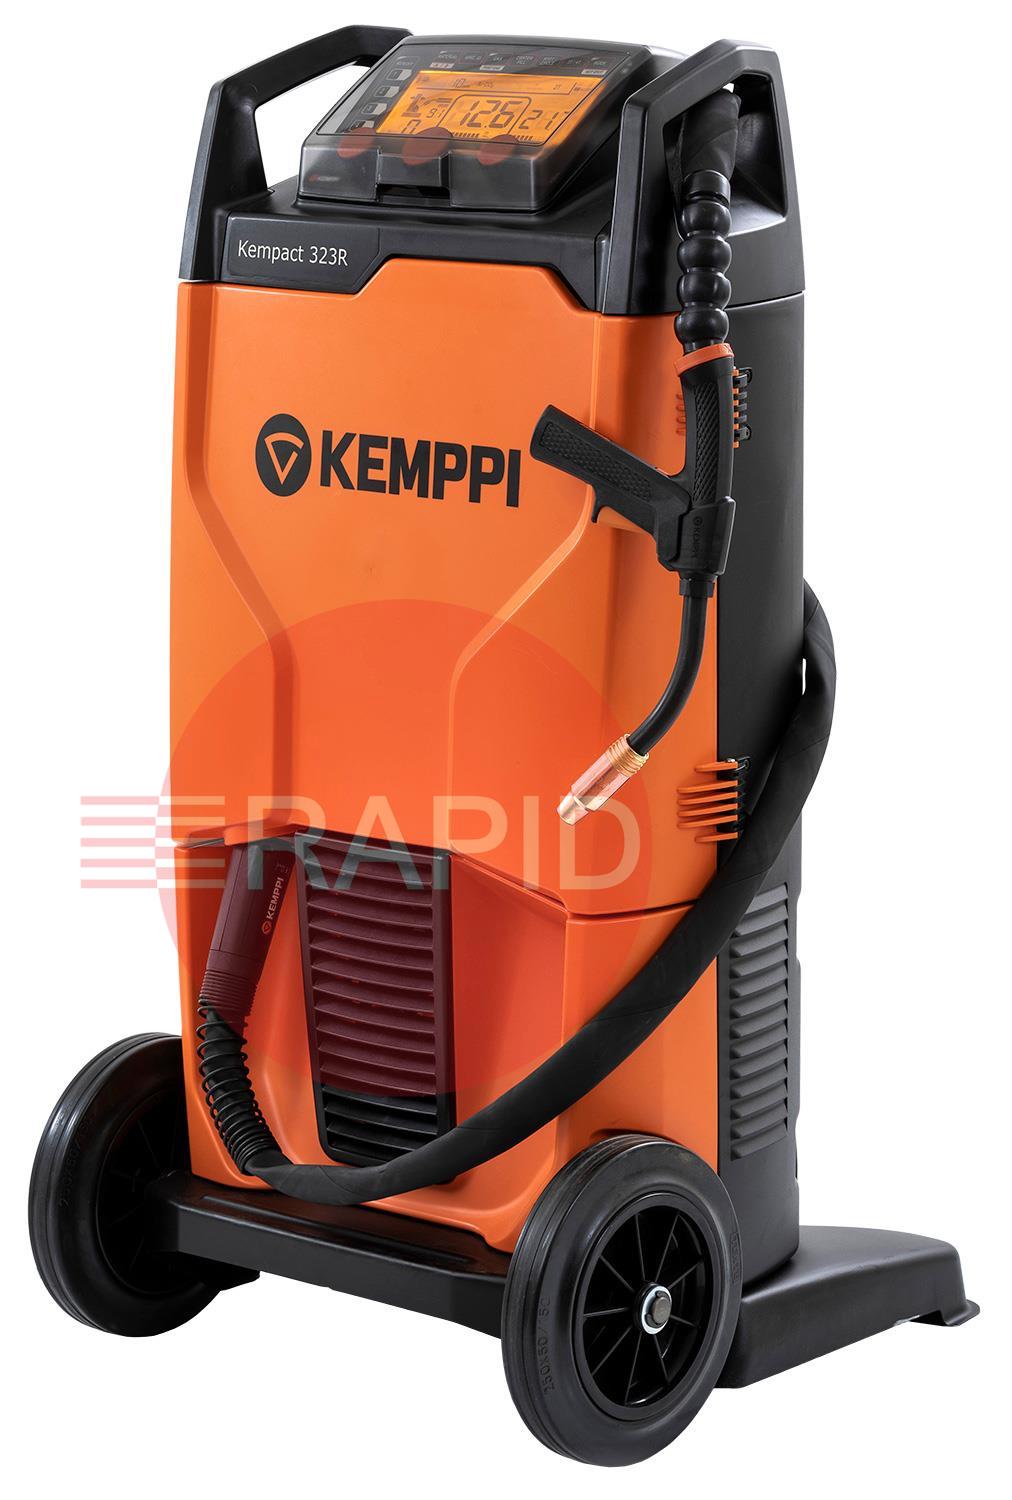 P2273GXE  Kemppi Kempact RA 323R, 320A 3 Phase 400v Mig Welder, with Flexlite GXe 205G 3.5m Torch